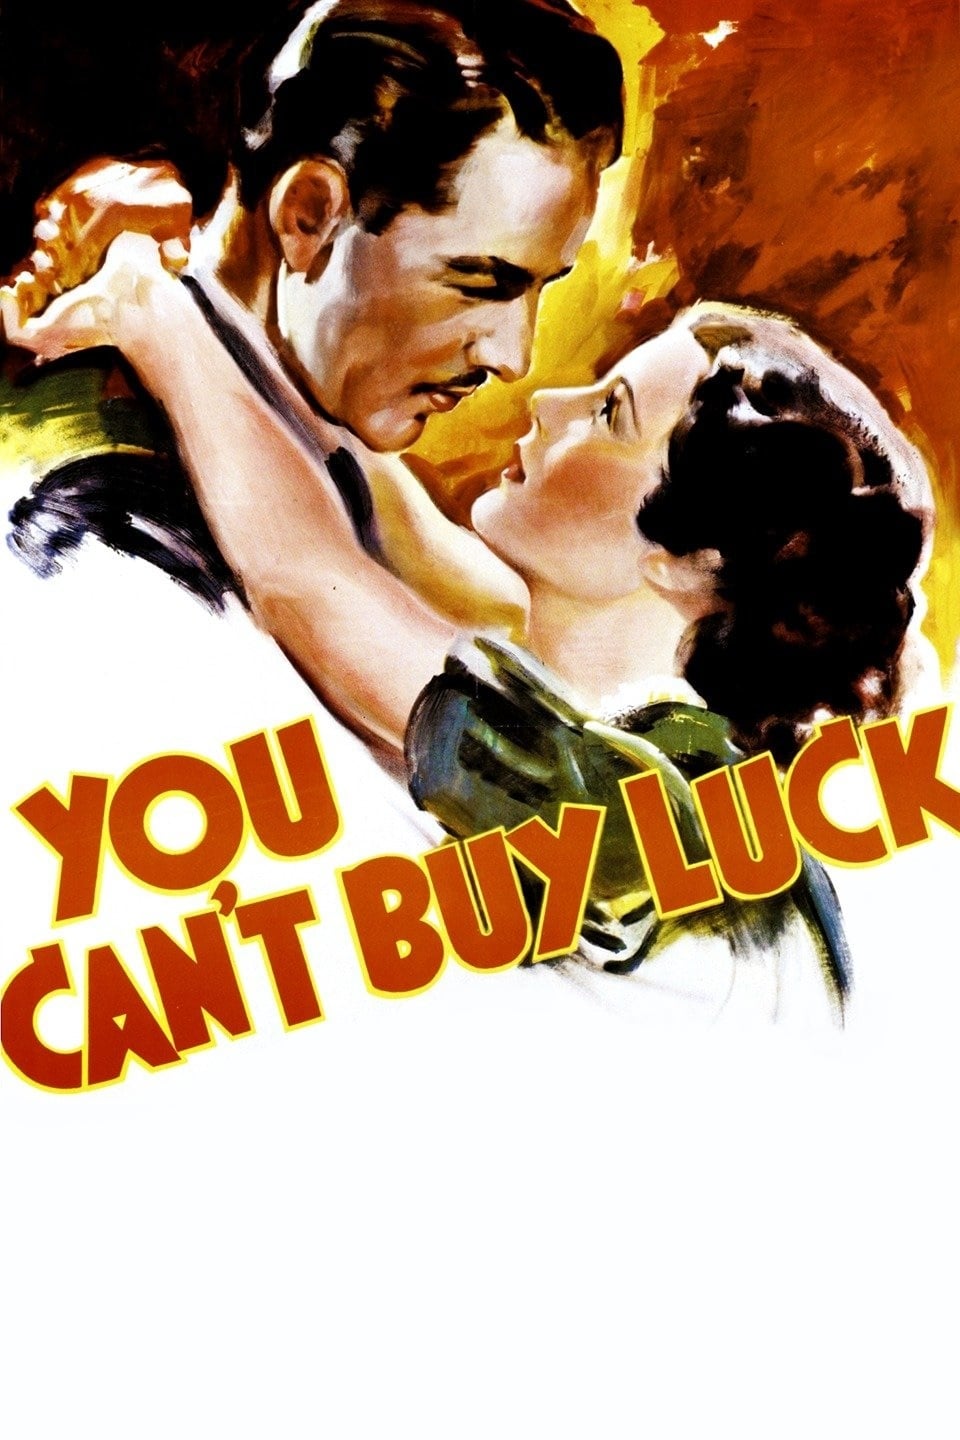 You Can't Buy Luck (1937)